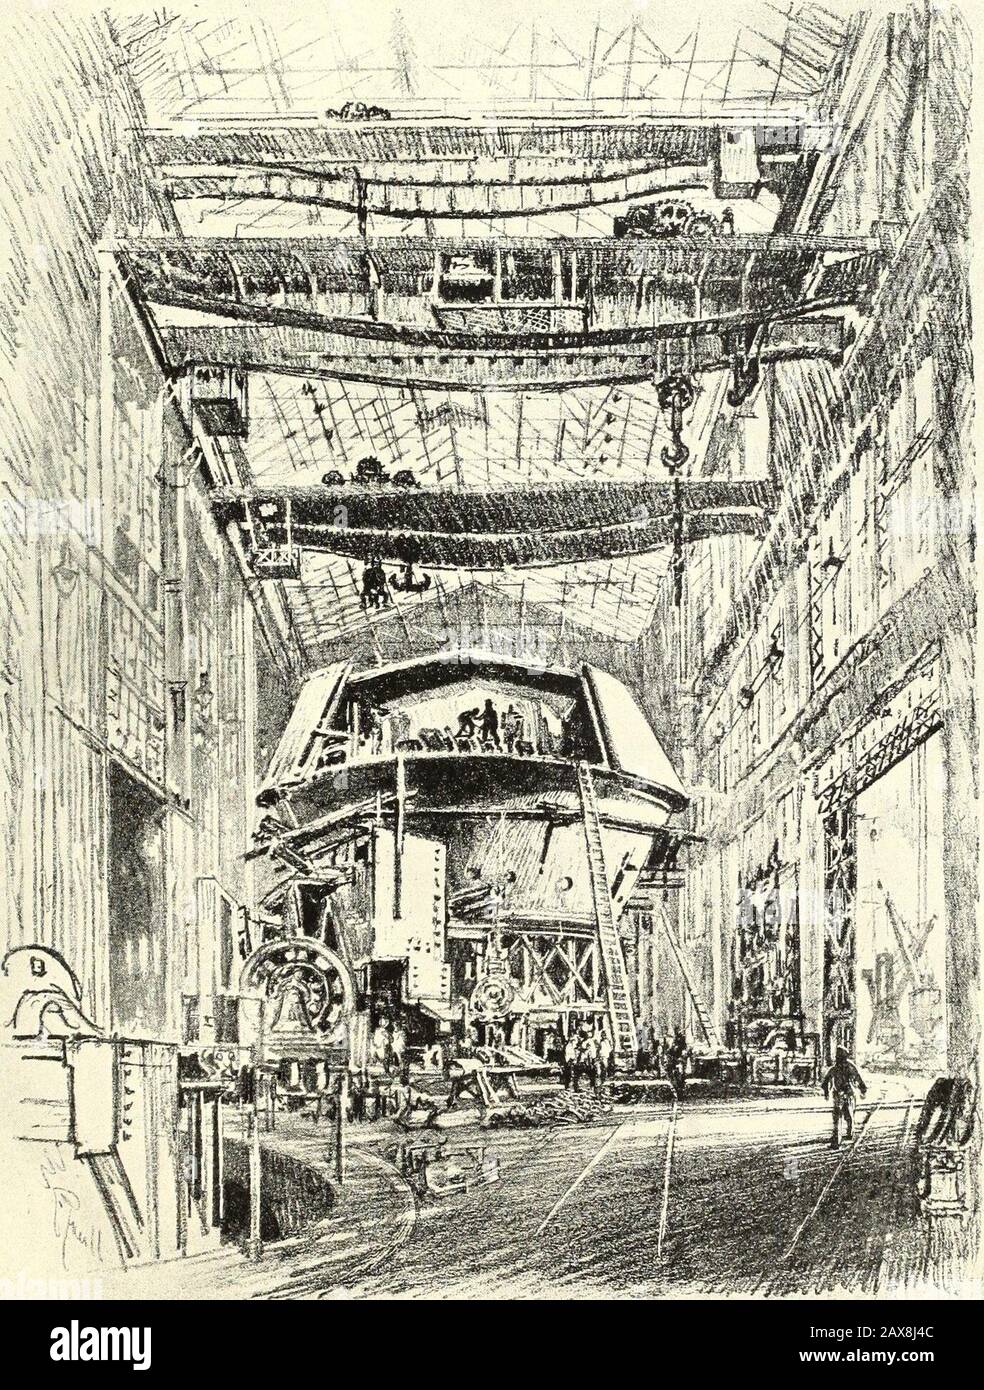 Joseph Pennell's pictures of war work in England, reproductions of a series of drawings and lithographs of the munition works made by him with the permission and authority of the British government . XXXVIIBUILDING THE GREAT TURRET XXXVII BUILDING THE GREAT TURRET STORY above story, all glass and iron, rises theshop where the great turrets are built, and belowthe floor in deep pits their bases stand. This is theother end of the shop in the previous picture. Theopen part of the turret made a design—the Pediment ofWar and Labour. Here was the Greek idea carried outby British workmen, and no Brit Stock Photo